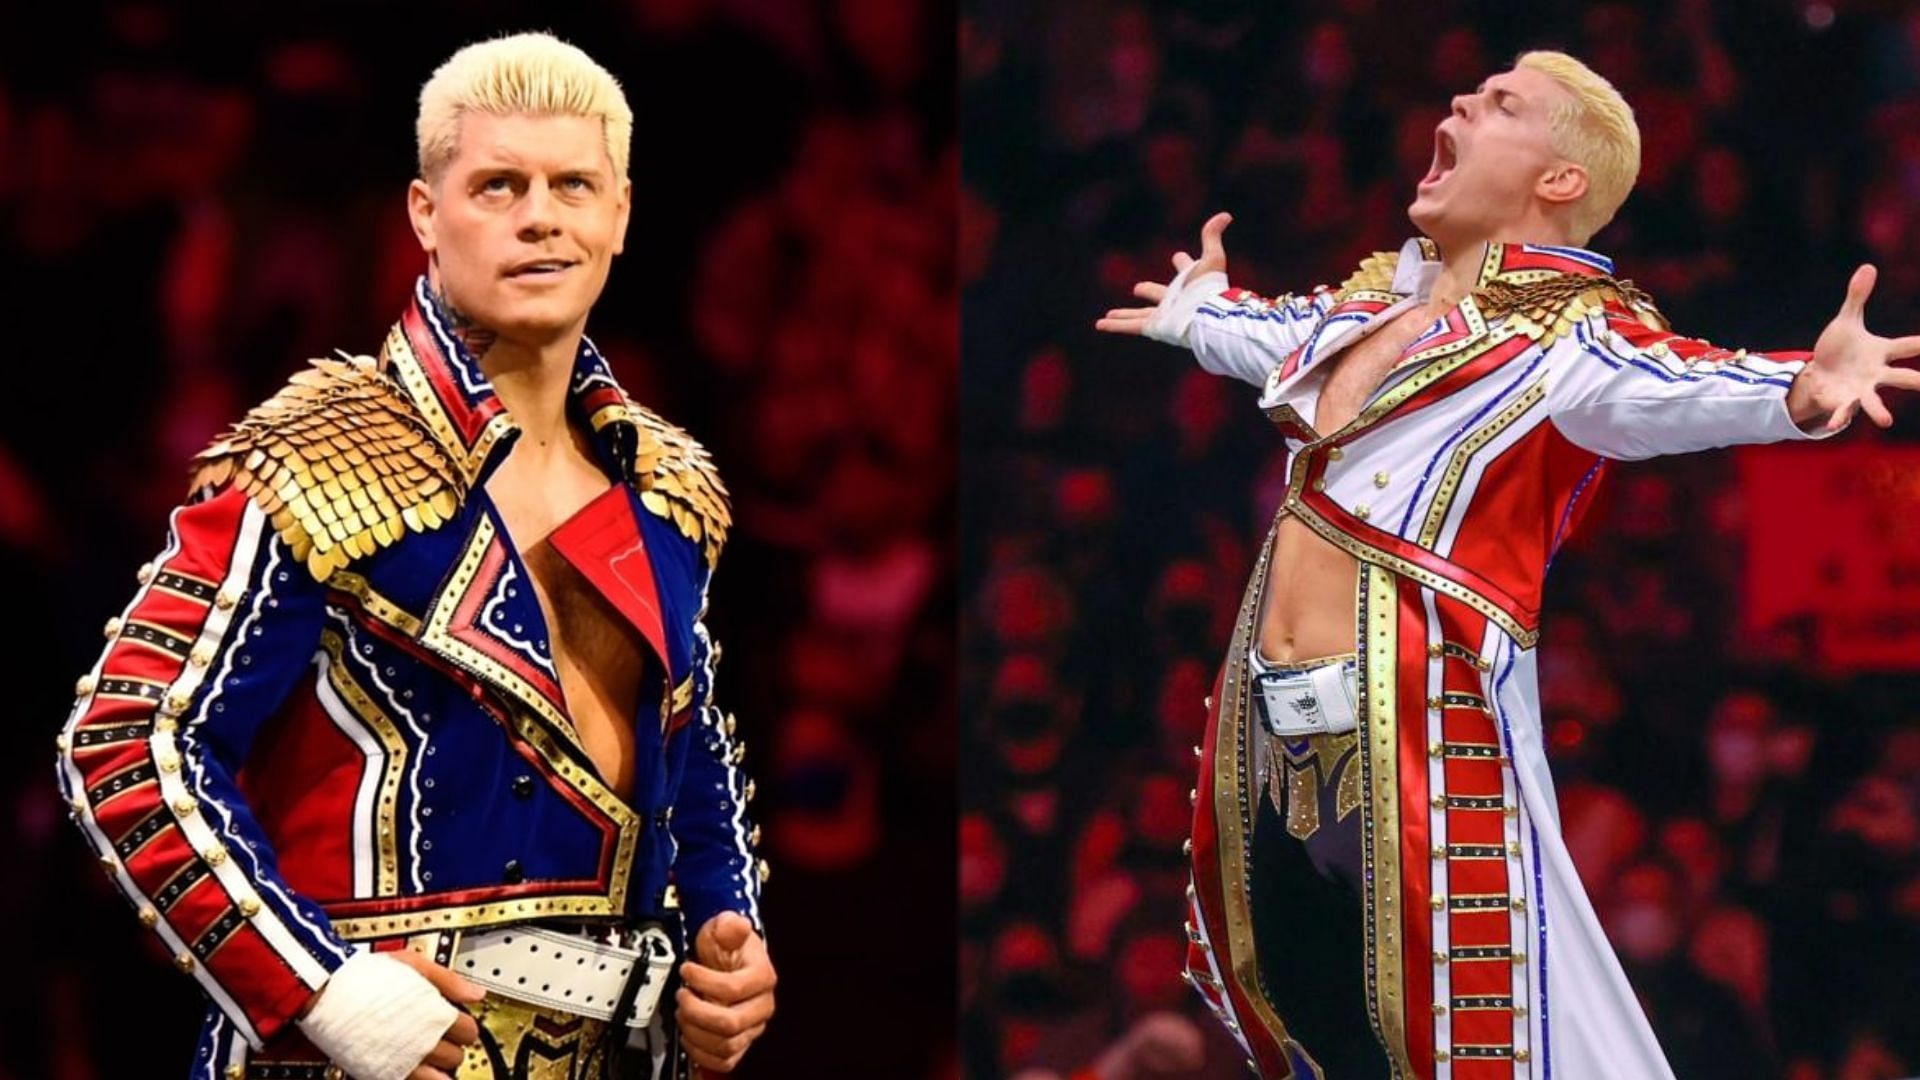 Cody Rhodes is one of the most talked about pro wrestlers in the industry today.